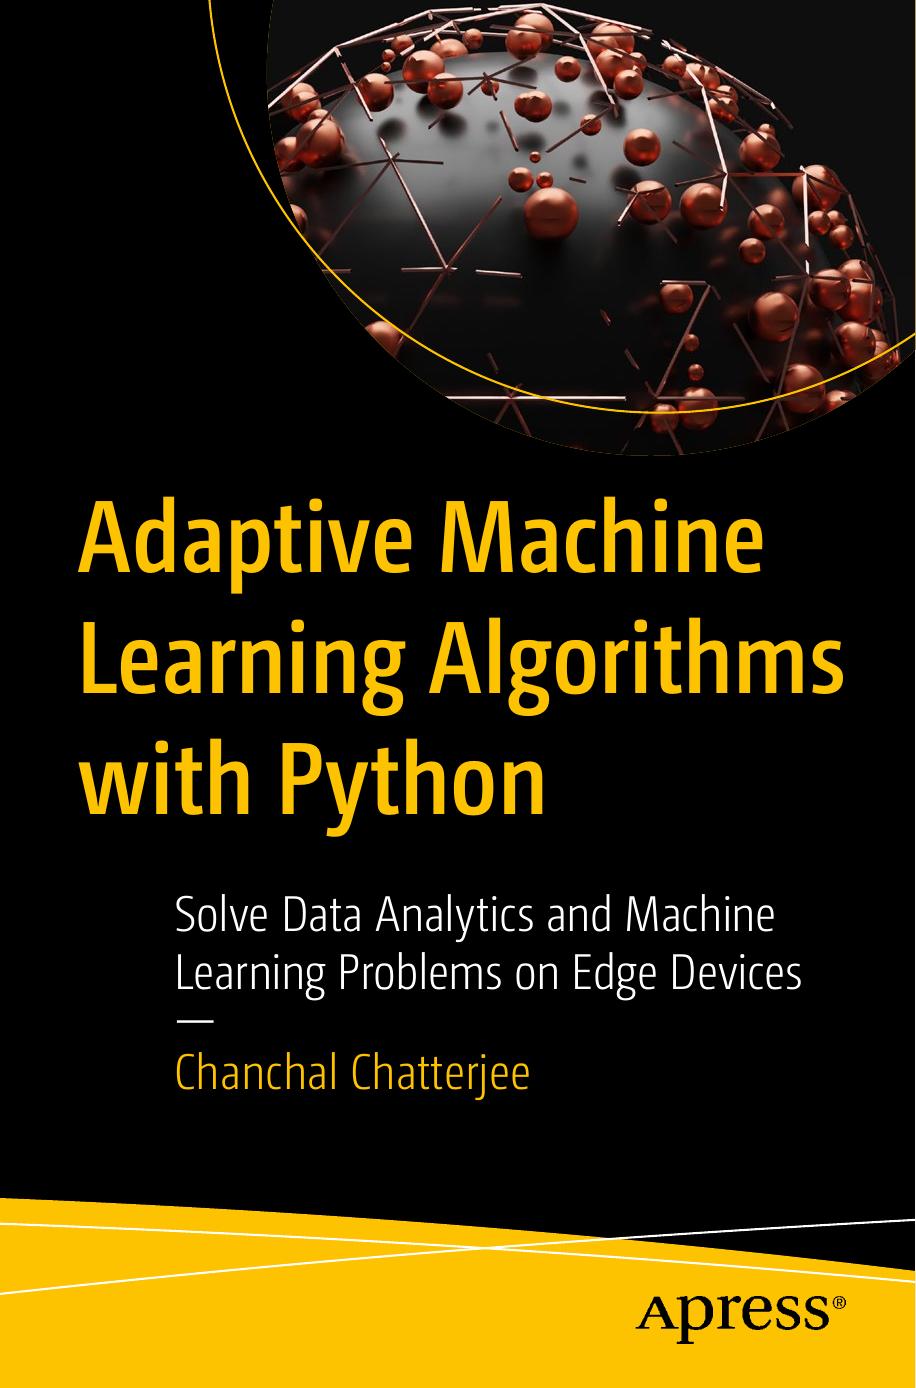 Adaptive Machine Learning Algorithms with Python Solve Data Analytics and Machine Learning Problems on Edge Devices